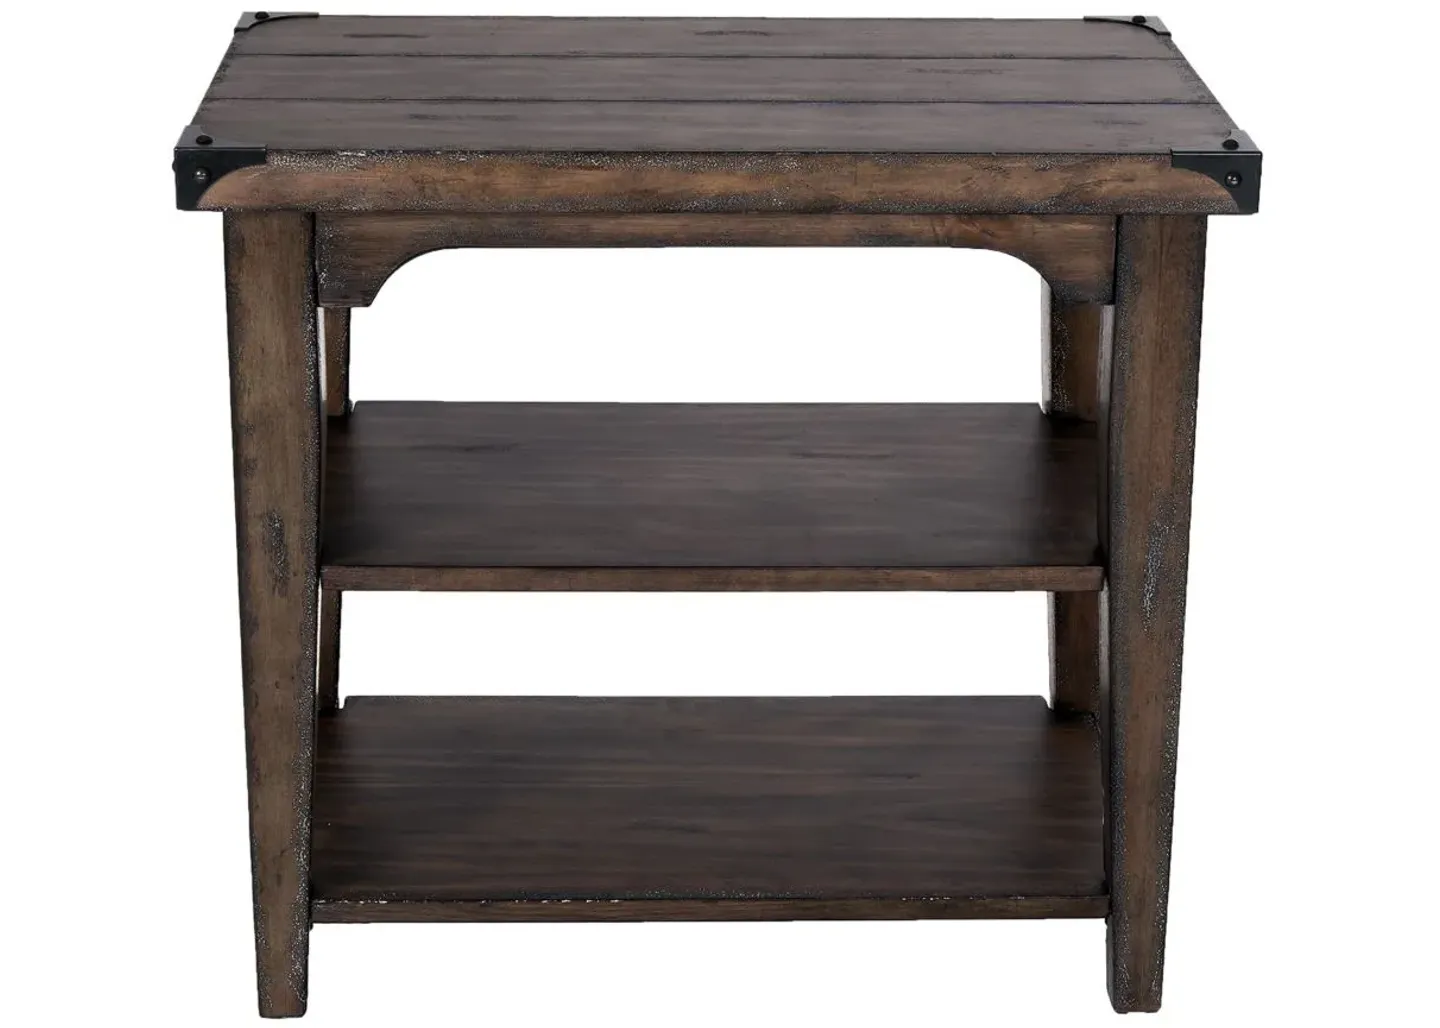 Liberty Furniture Aspen Skies Rectangular Chairside Table in Weathered Brown by Liberty Furniture